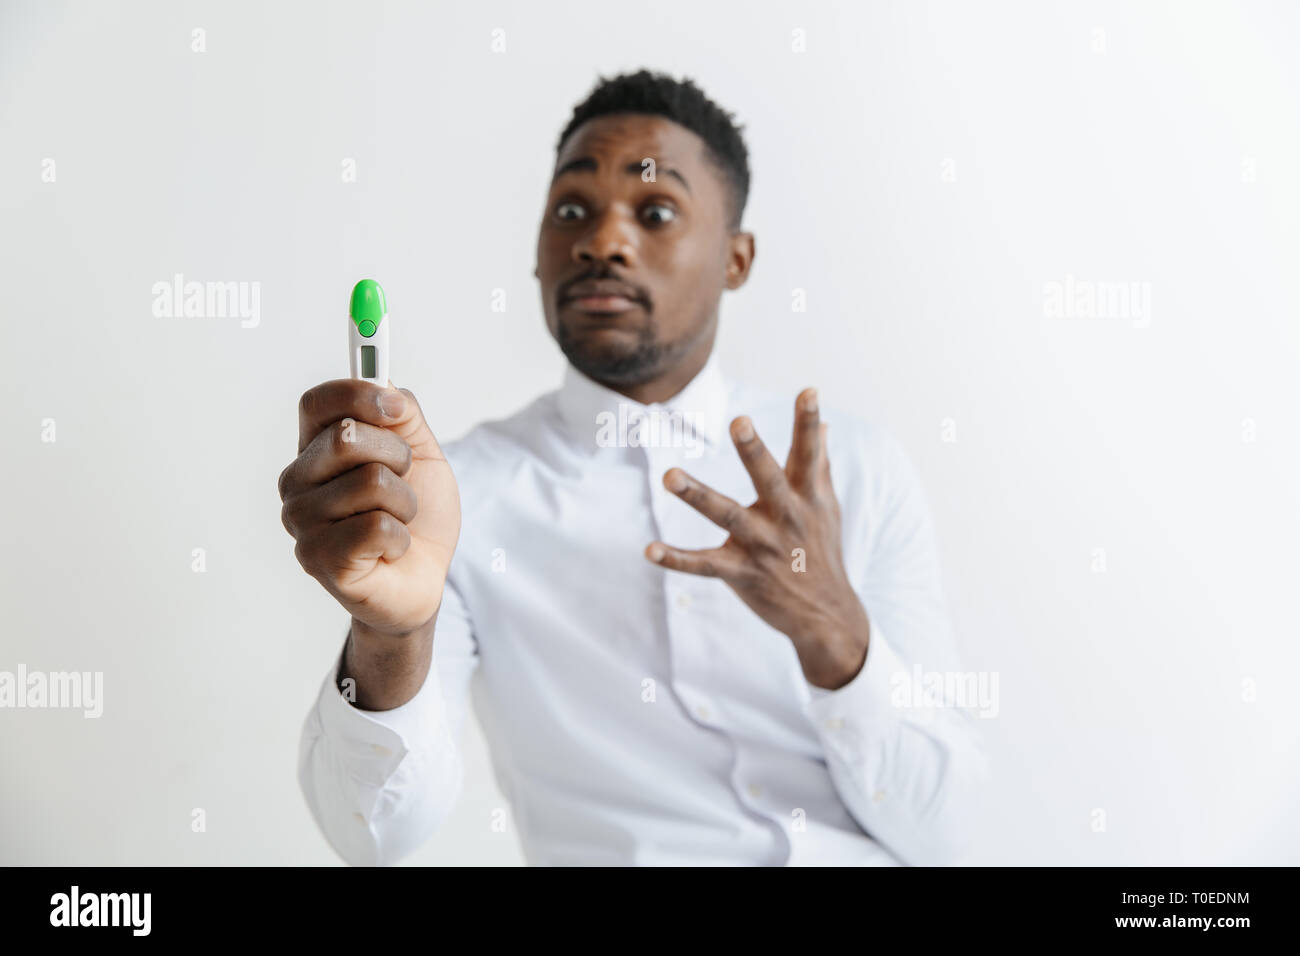 Young unhappy african american man looking at pregnancy test. Handsome sad man frustrated and having problems. Guy depressed because of result of pregnancy test Stock Photo